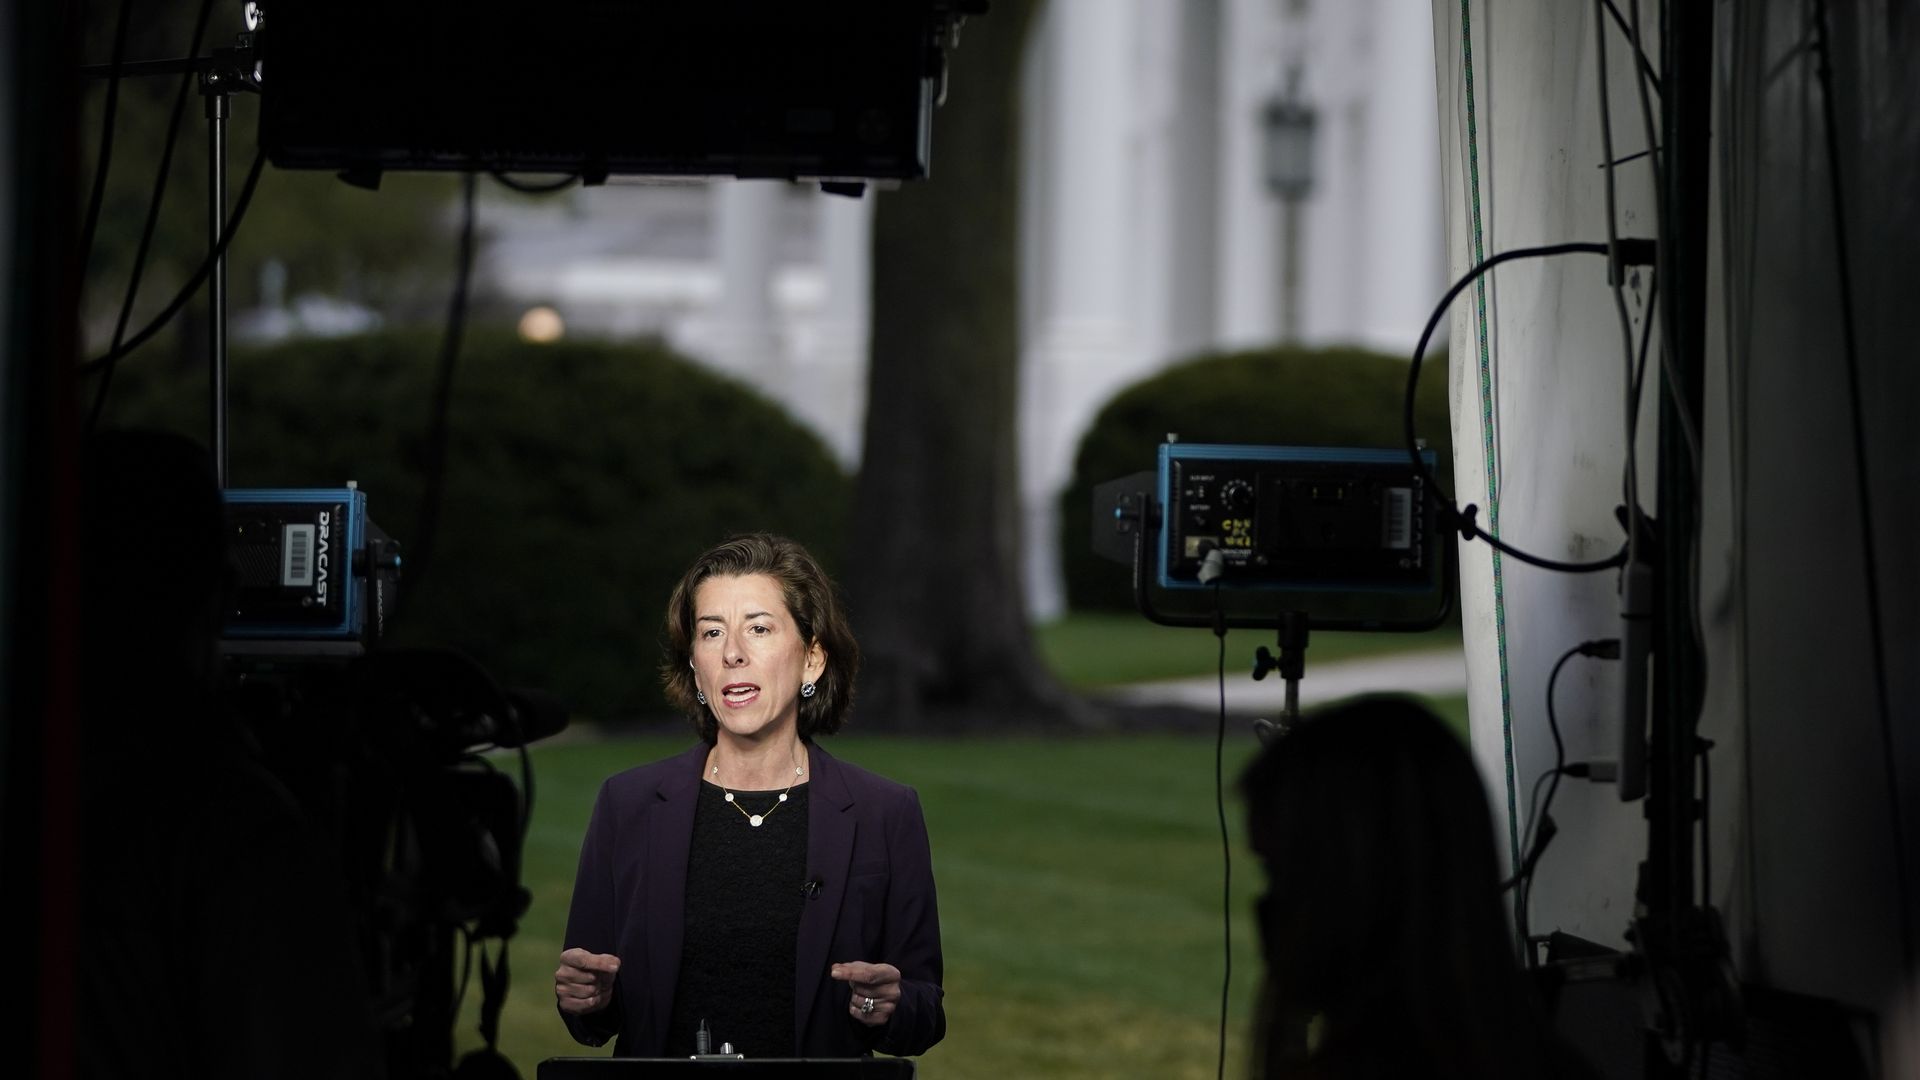 Commerce Secretary Gina Raimondo is seen giving a TV interview from the front lawn of the White House.